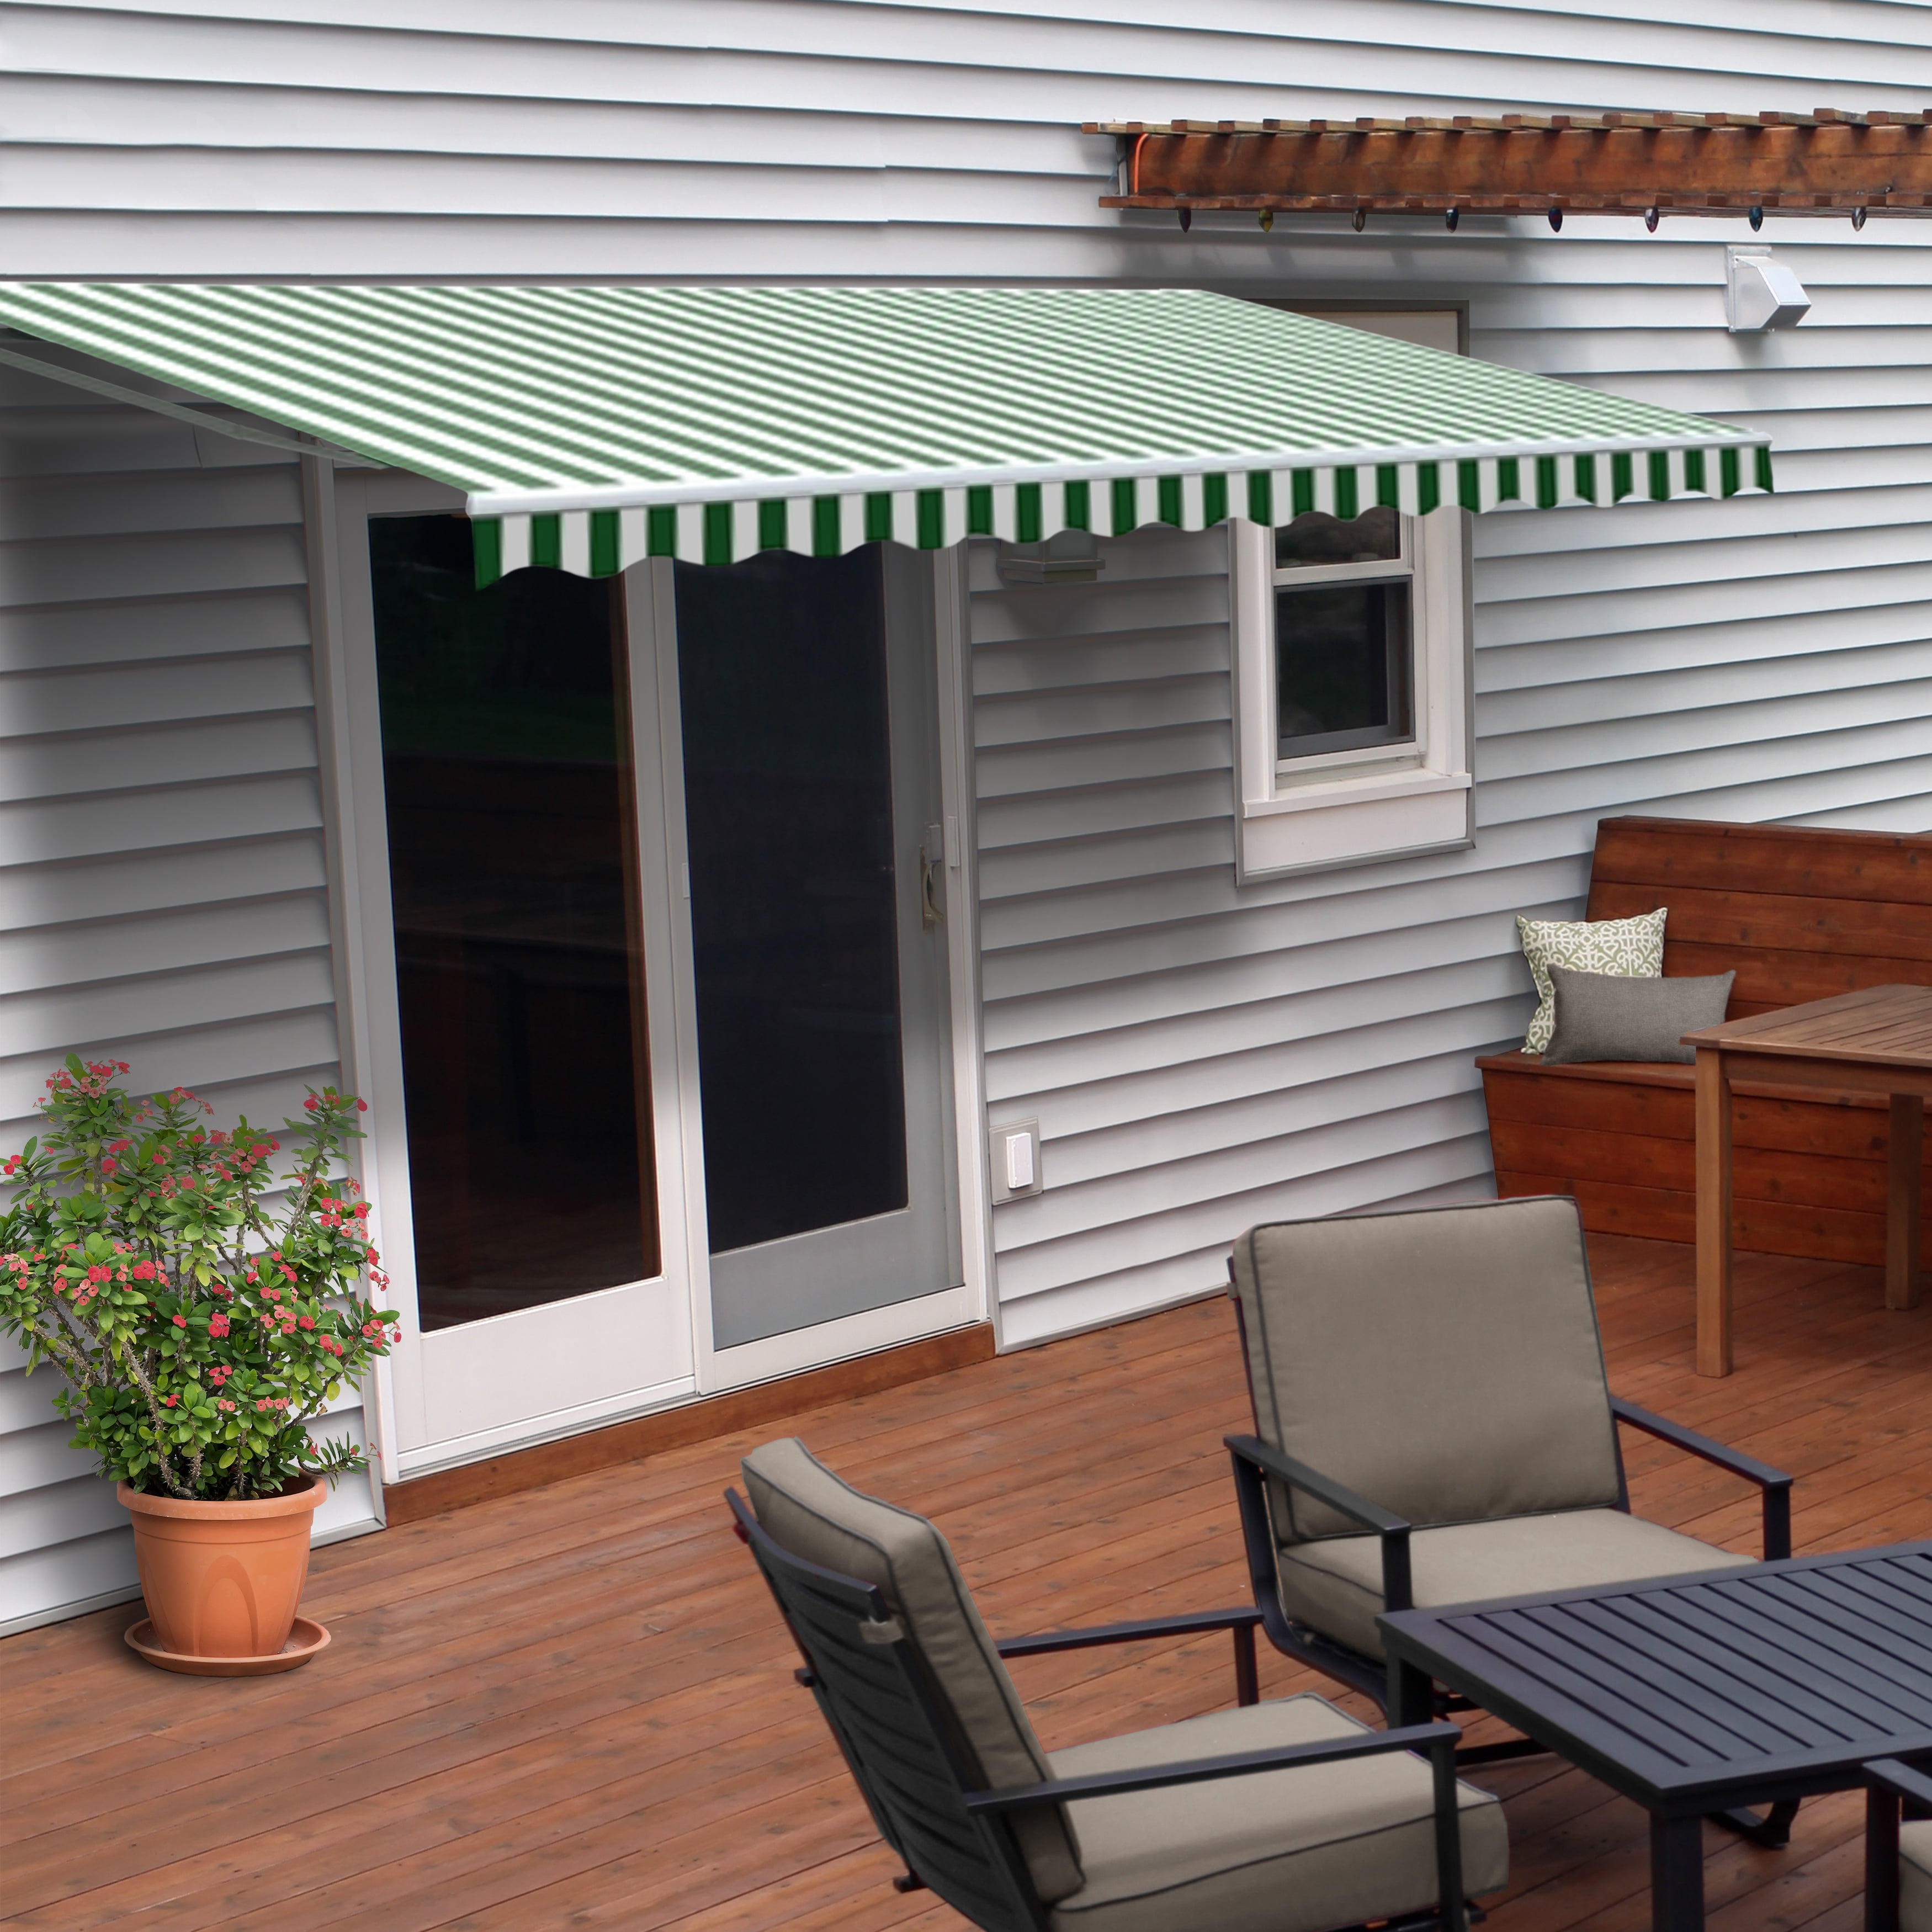 ALEKO Retractable Patio Awning 10 X 8 Ft Deck Sunshade Green and White Stripe 